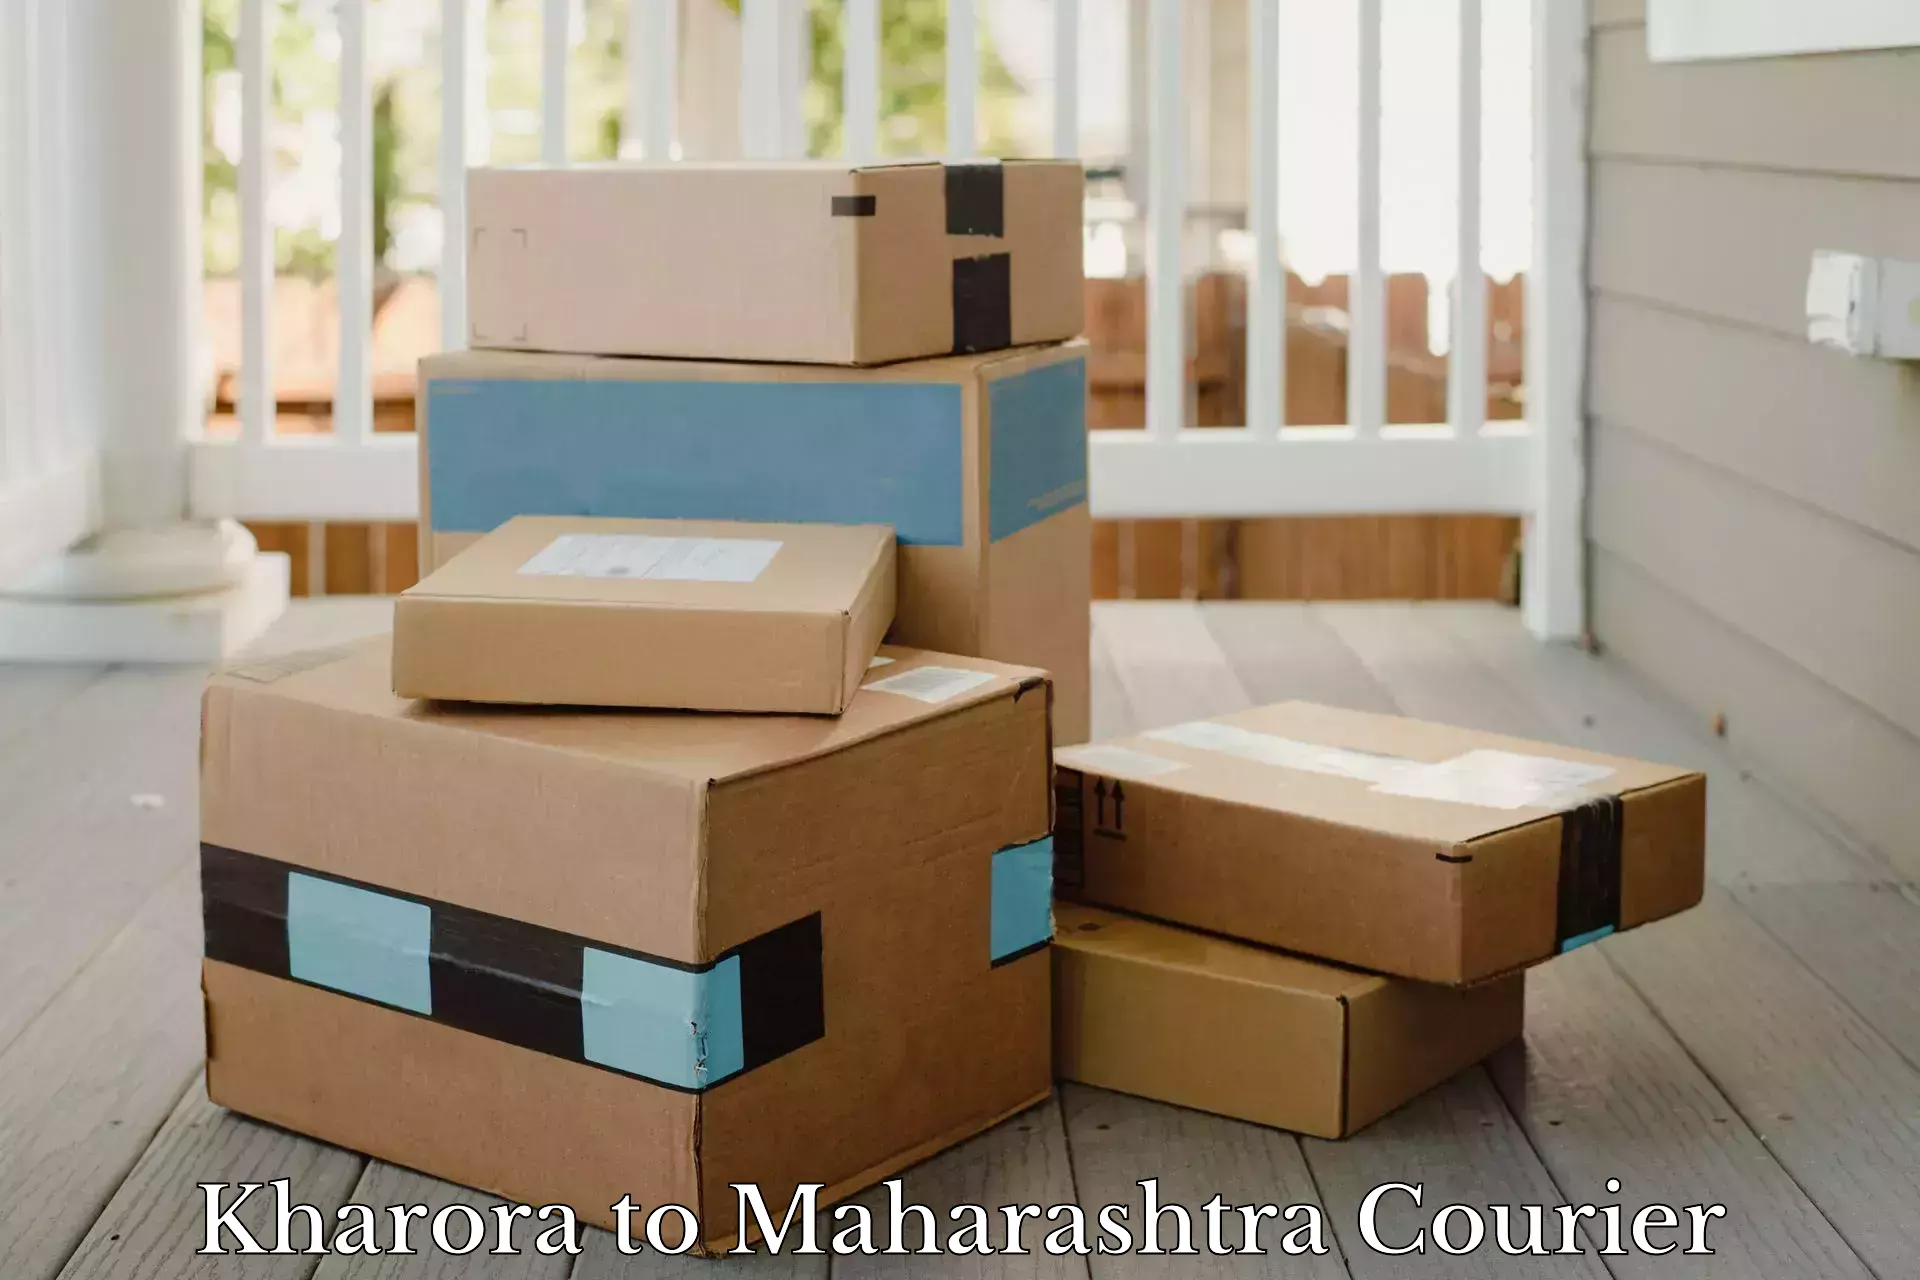 High-quality delivery services in Kharora to Ahmednagar